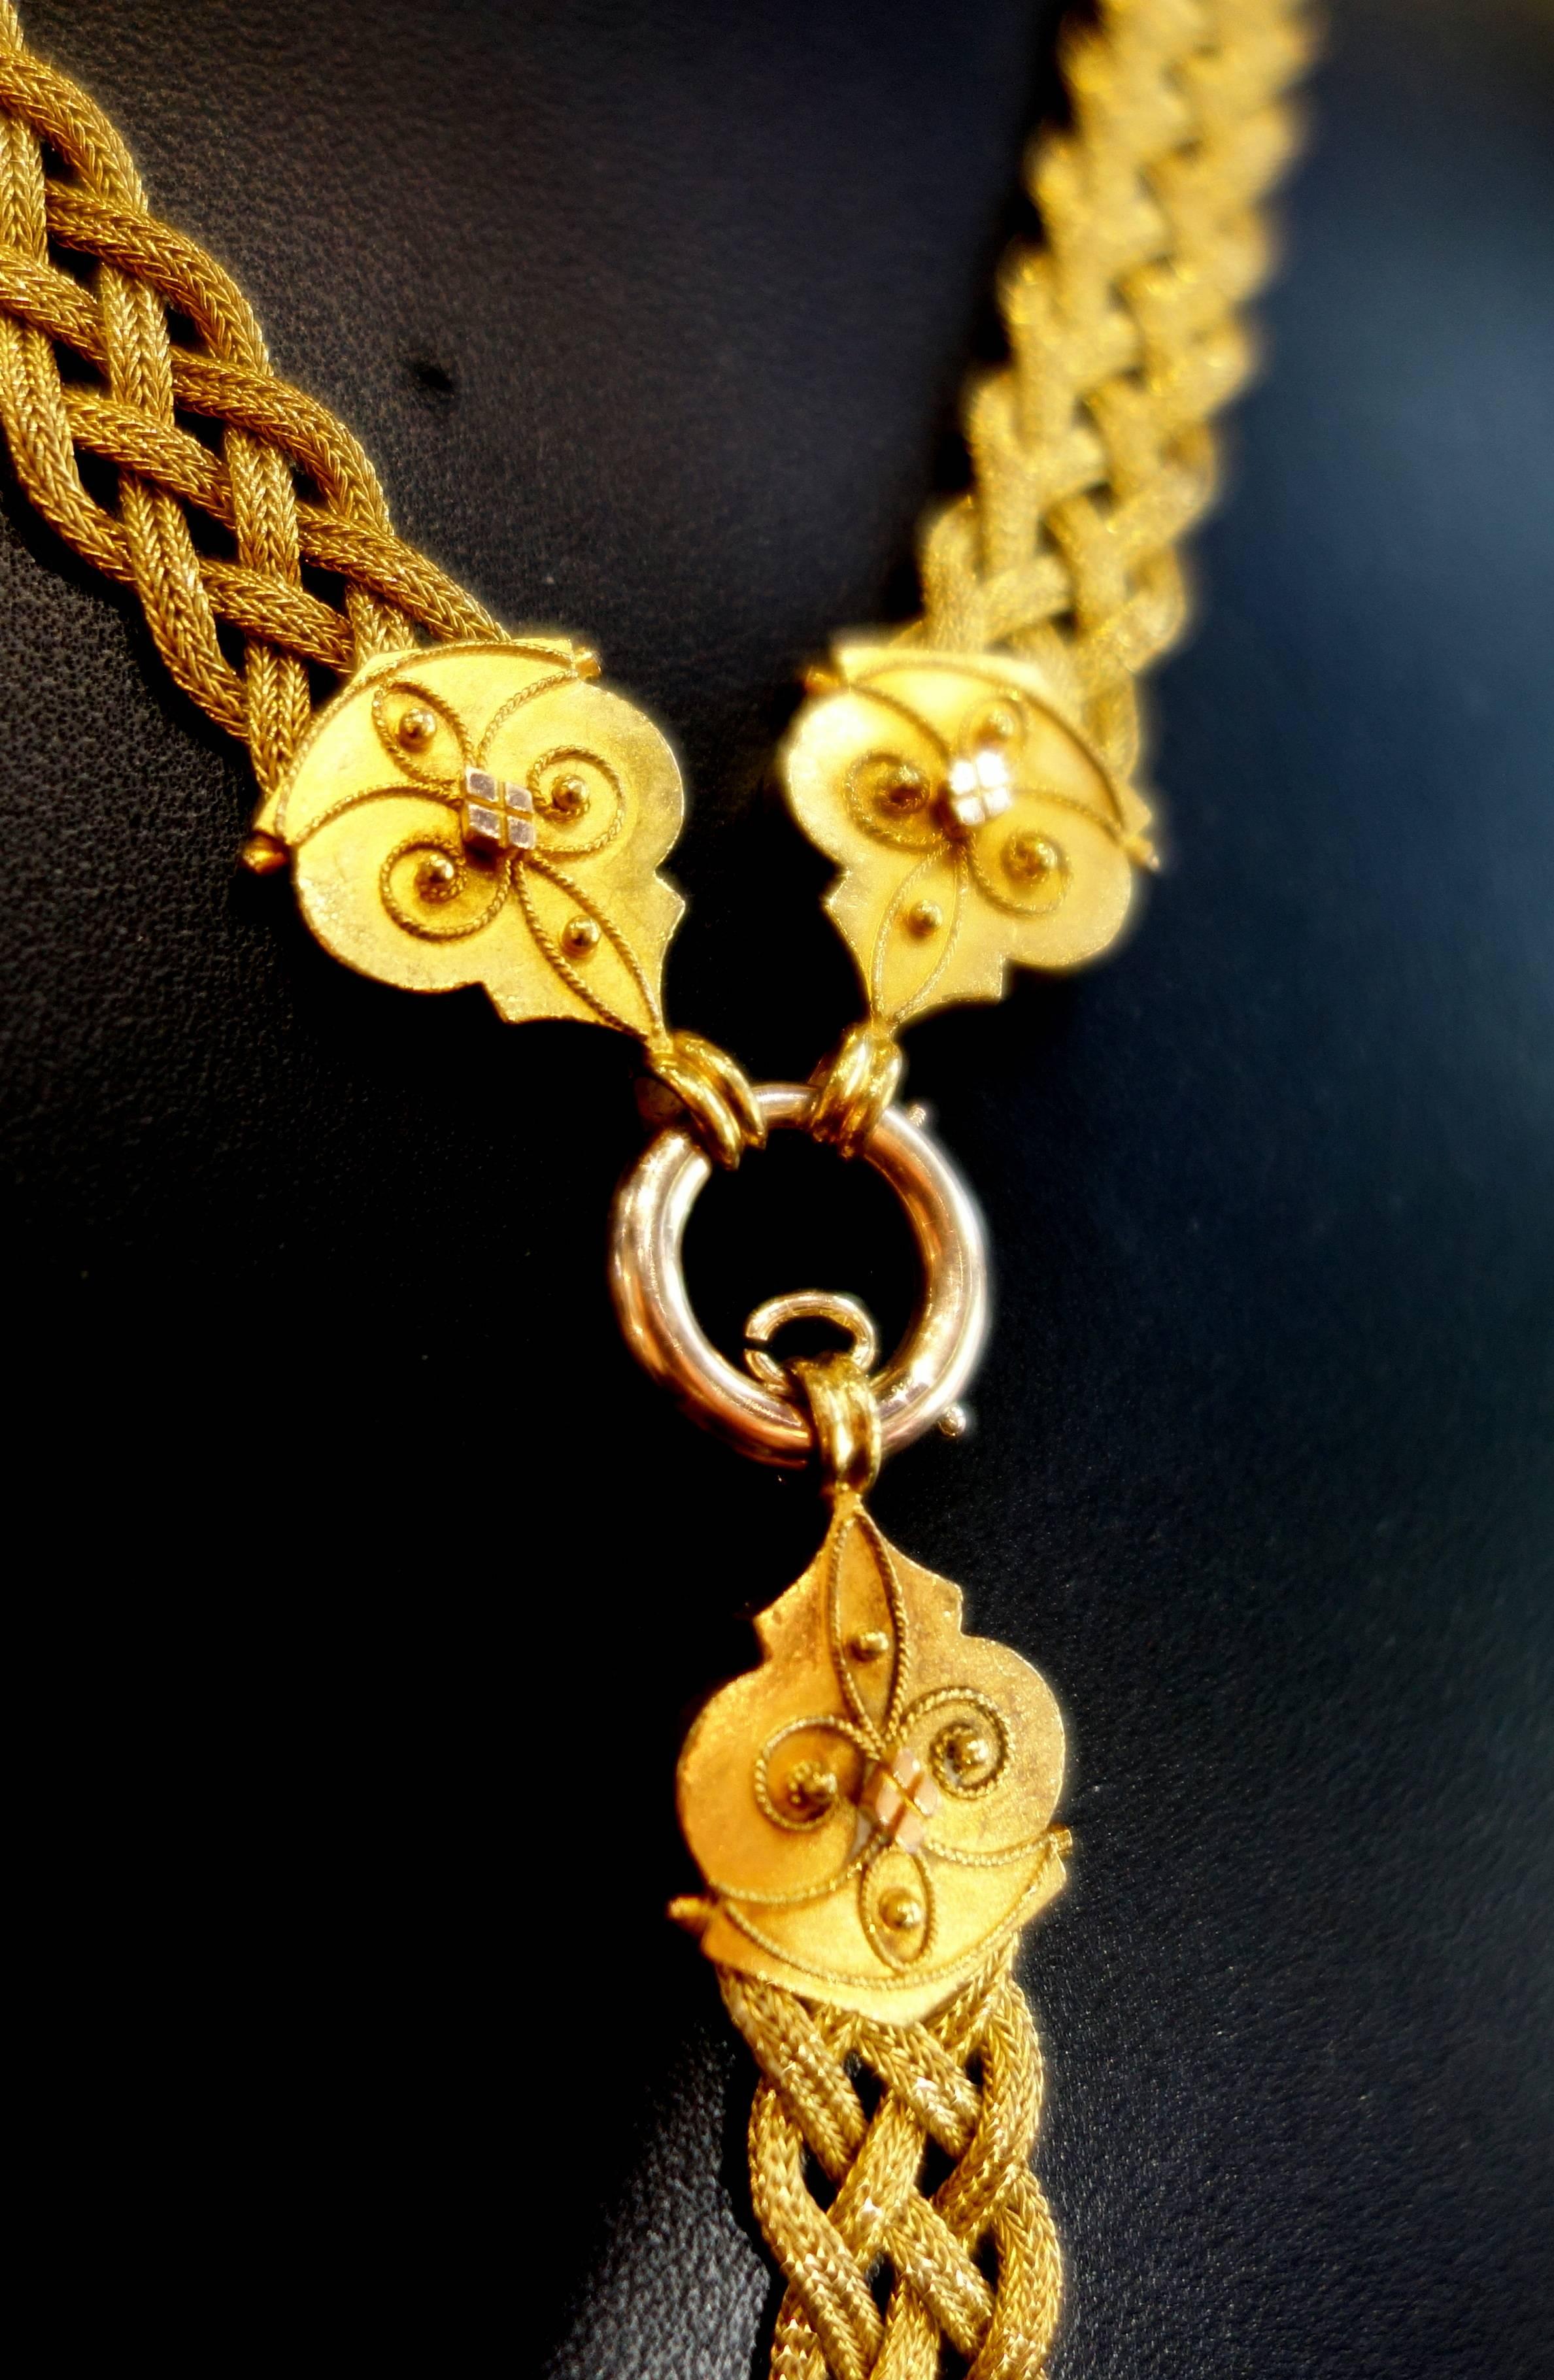 Women's 1860s Victorian Braided Gold Necklace and Locket